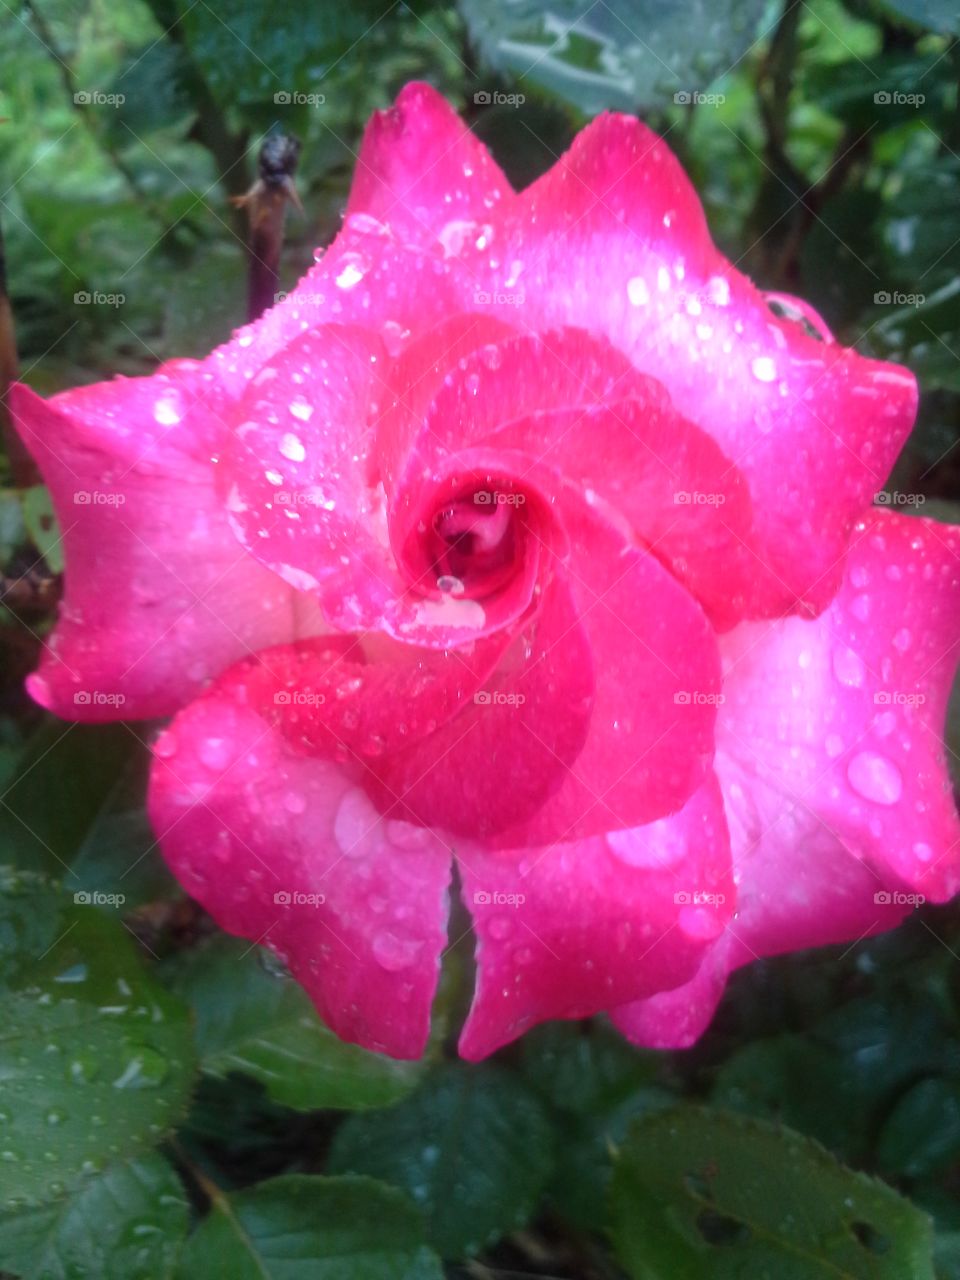 dew droplets. a rose after a gentle rain